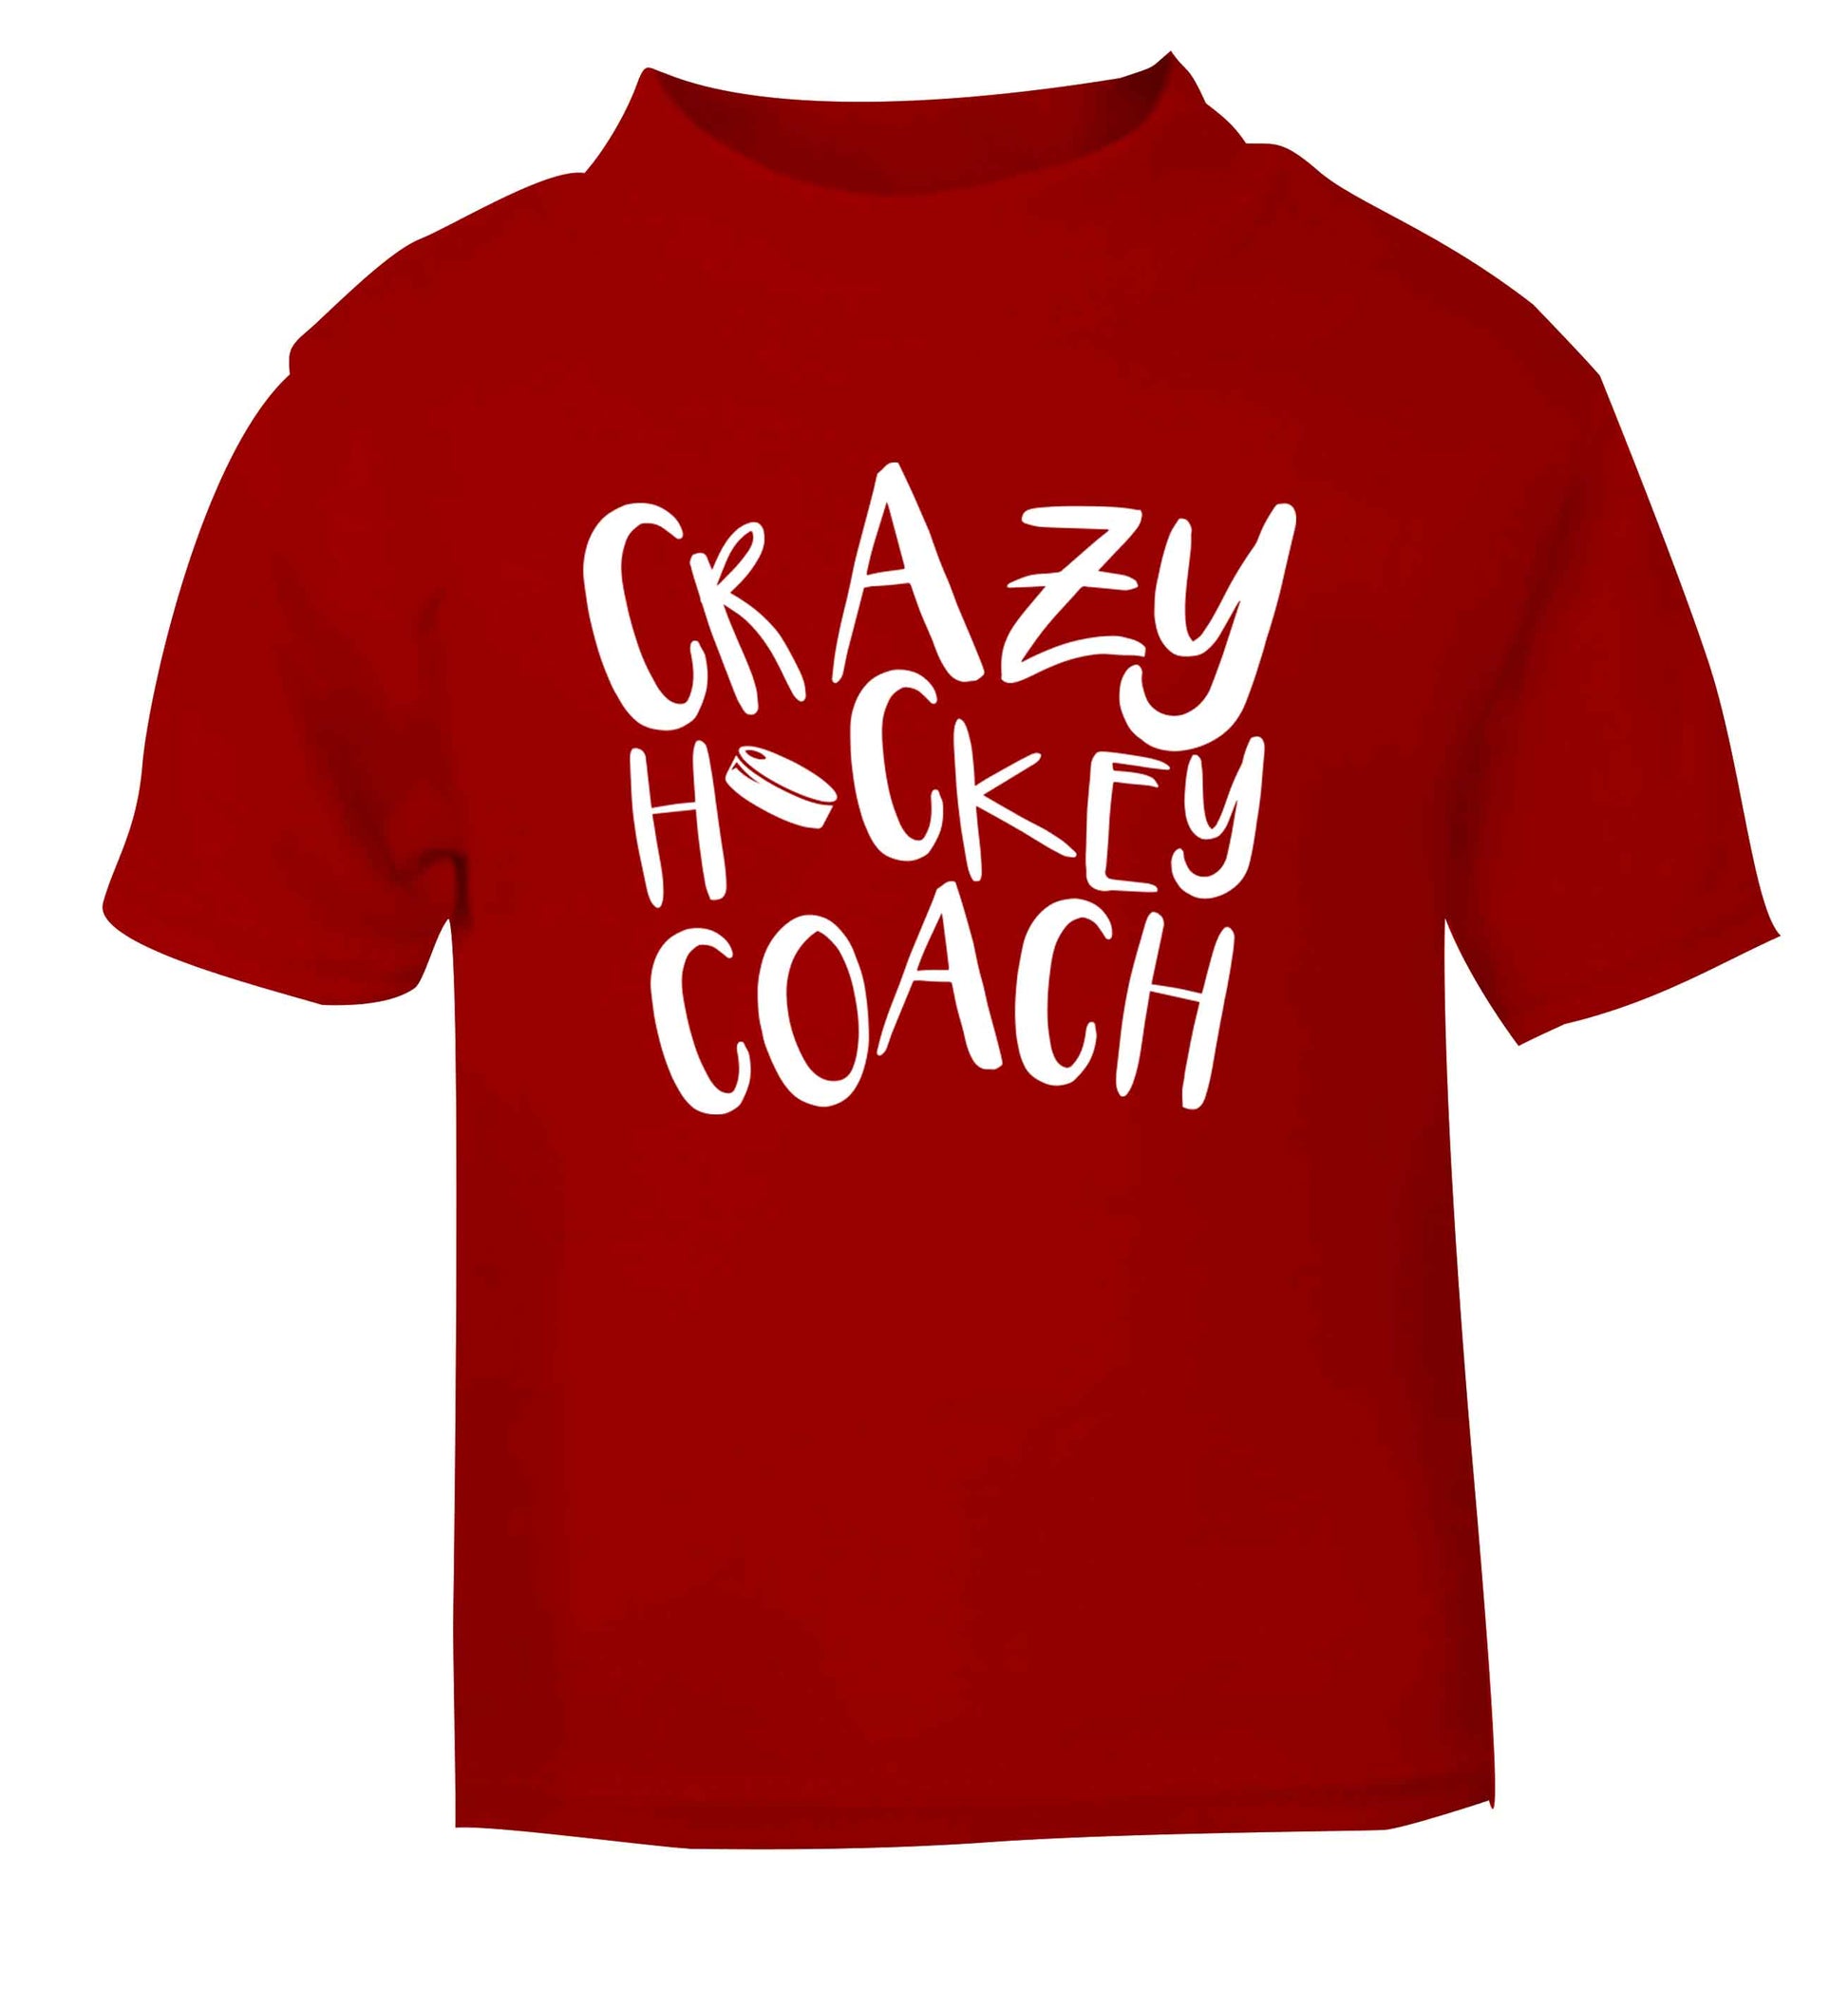 Crazy hockey coach red Baby Toddler Tshirt 2 Years